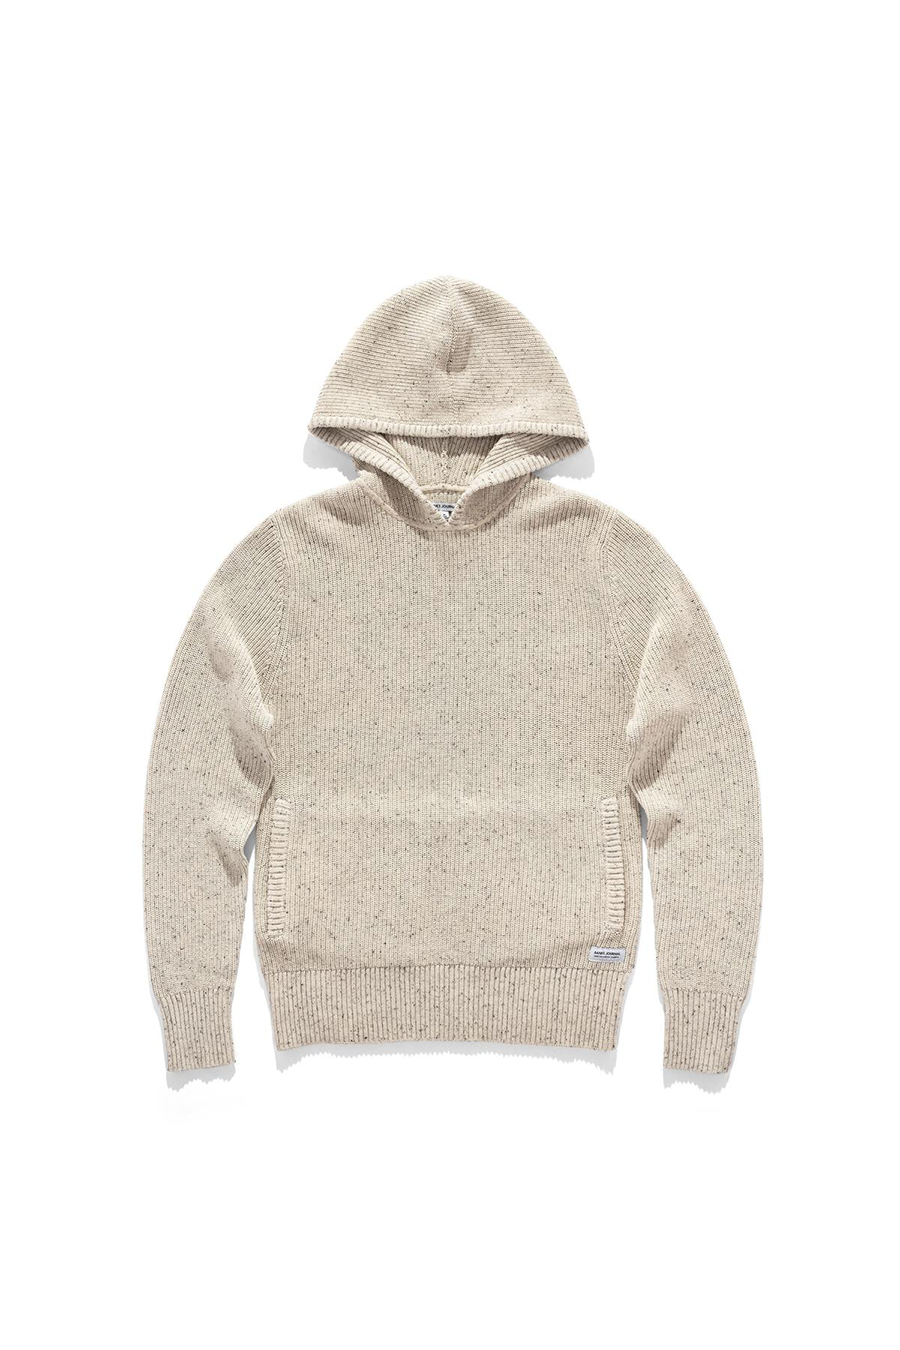 Across Knit Hoodie | Off White - Main Image Number 2 of 3